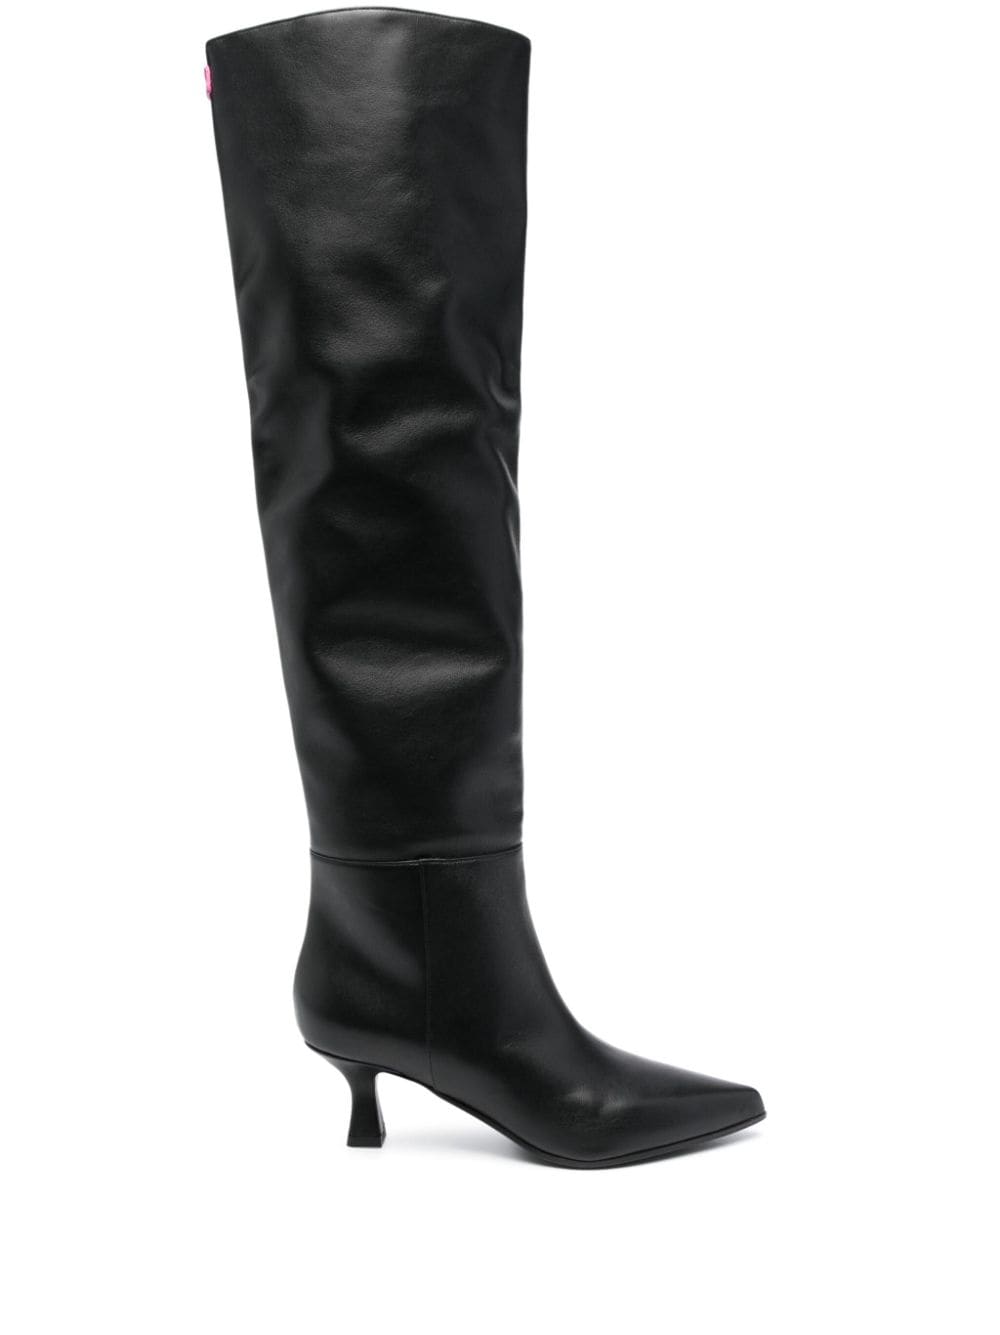 60mm pointed-toe leather boots